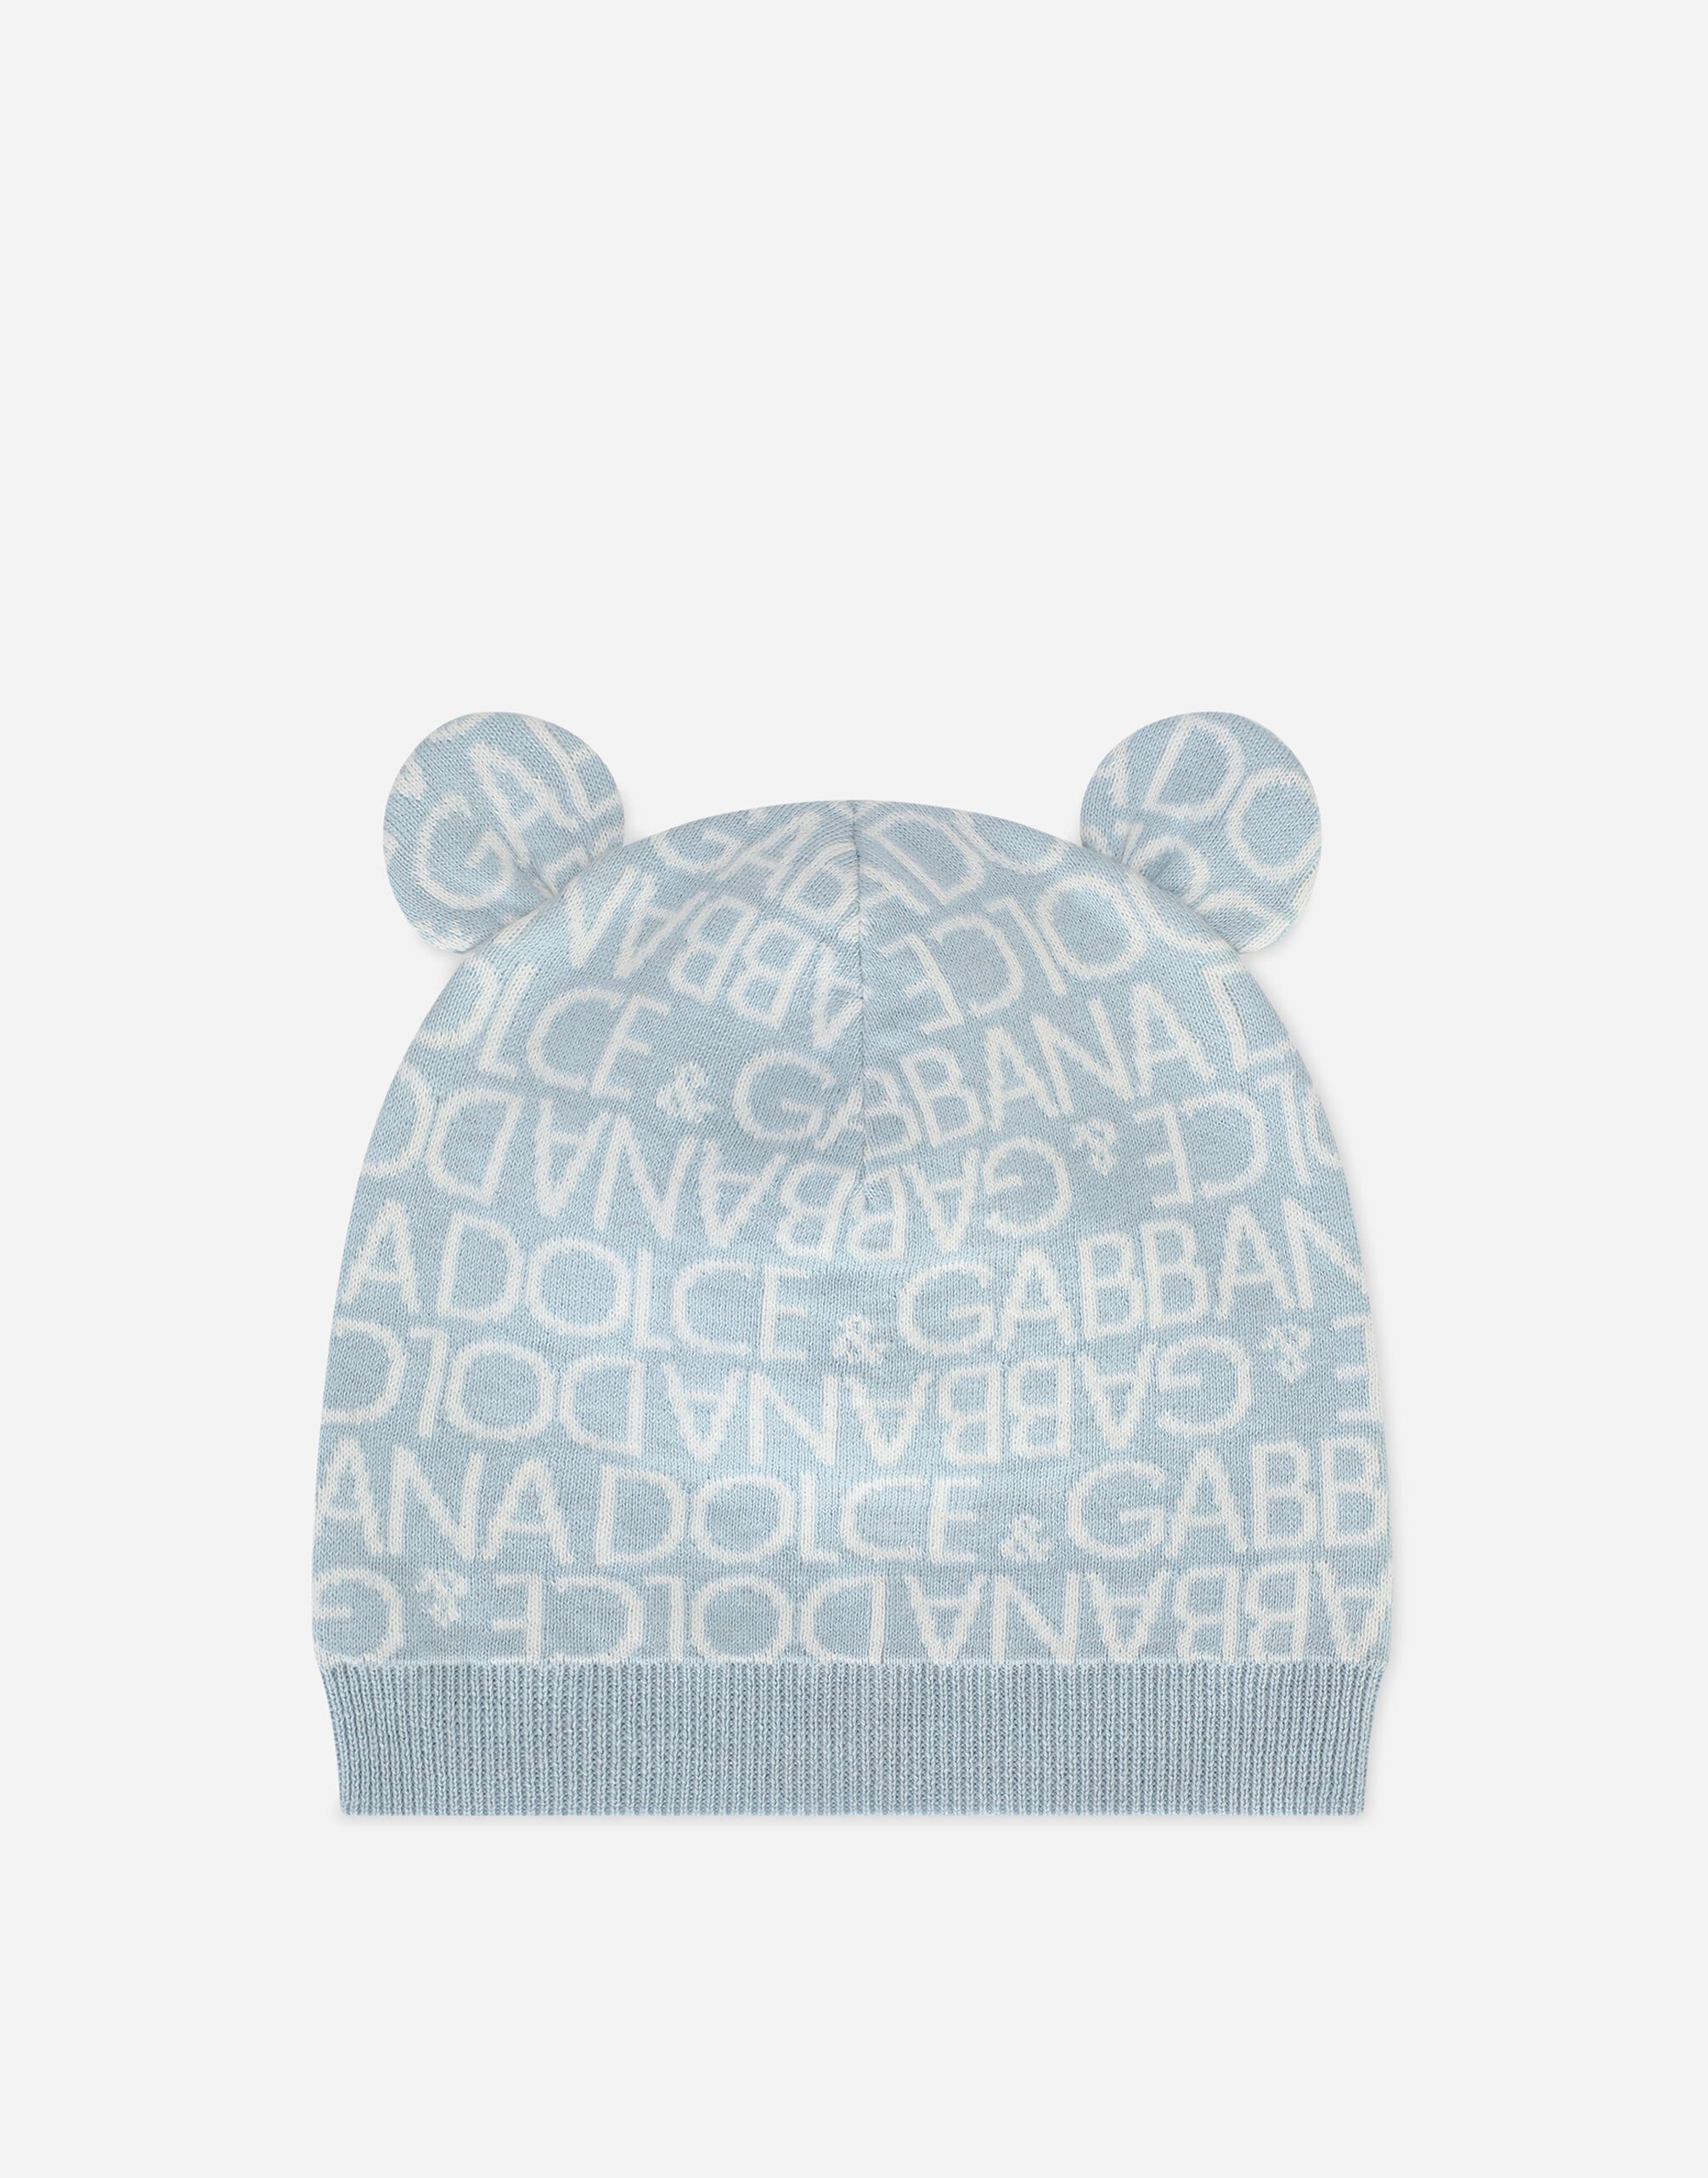 Dolce & Gabbana Knit hat with jacquard logo and ears Print LNJAE7G7M6F